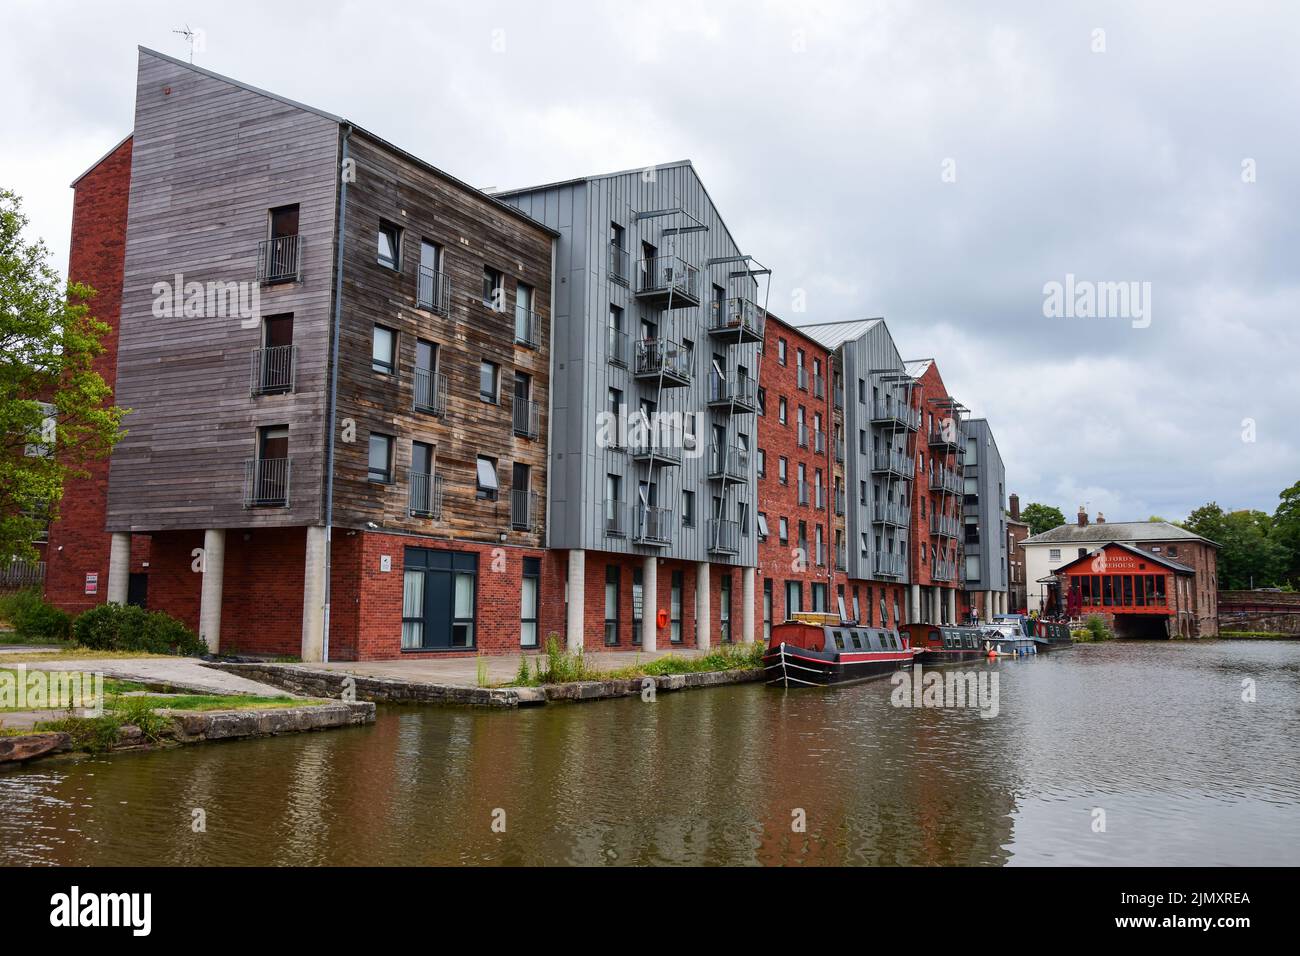 Chester, UK: Jul 3, 2022: A general scene of the Shropshire Union Canal in Chester, with canal boats moored outside a modern block of student accommod Stock Photo